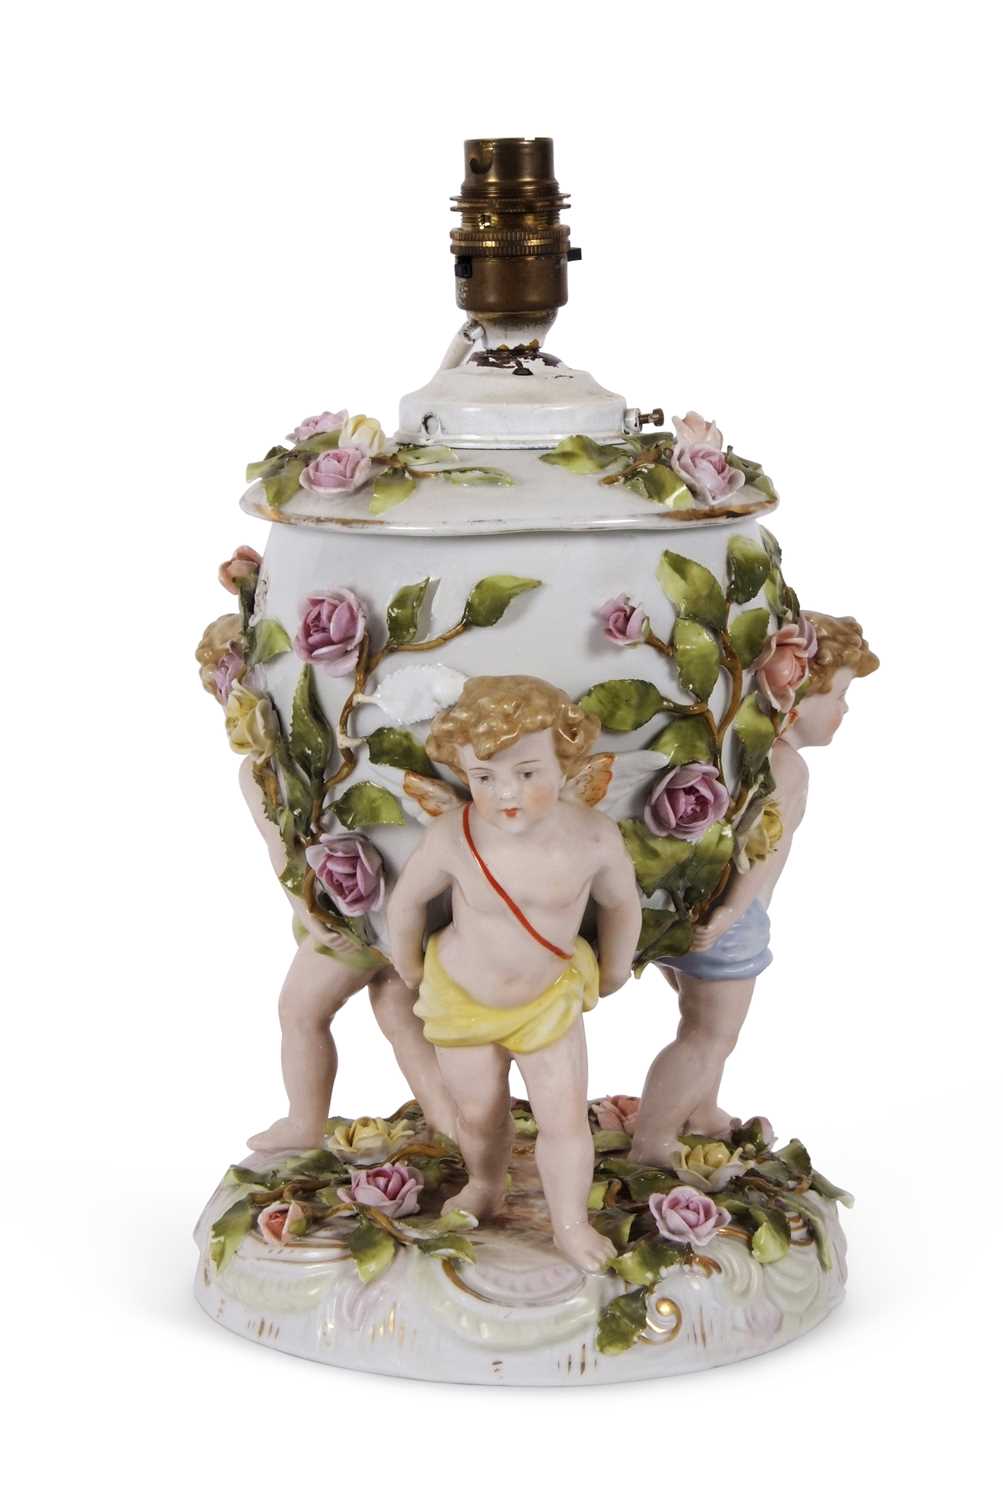 A large continental porcelain lamp base, the lamp base supported by three large cherubs with applied